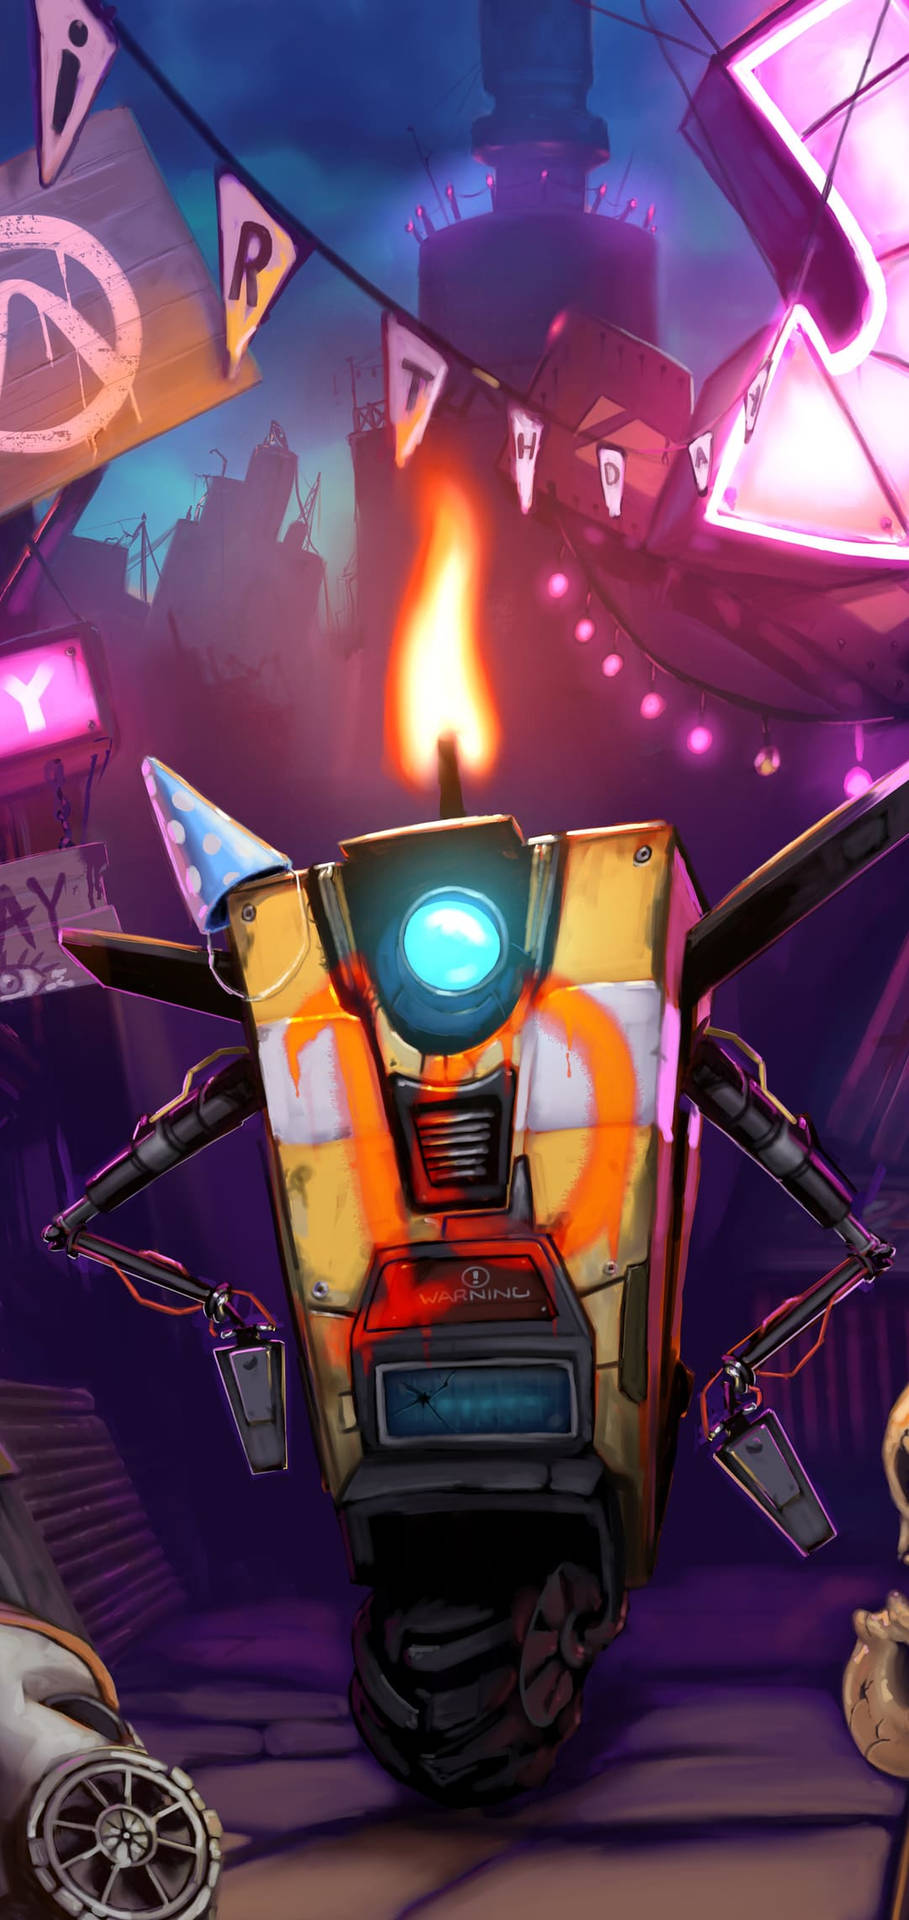 Take On The Challenges Ahead With The New Borderlands Iphone Background